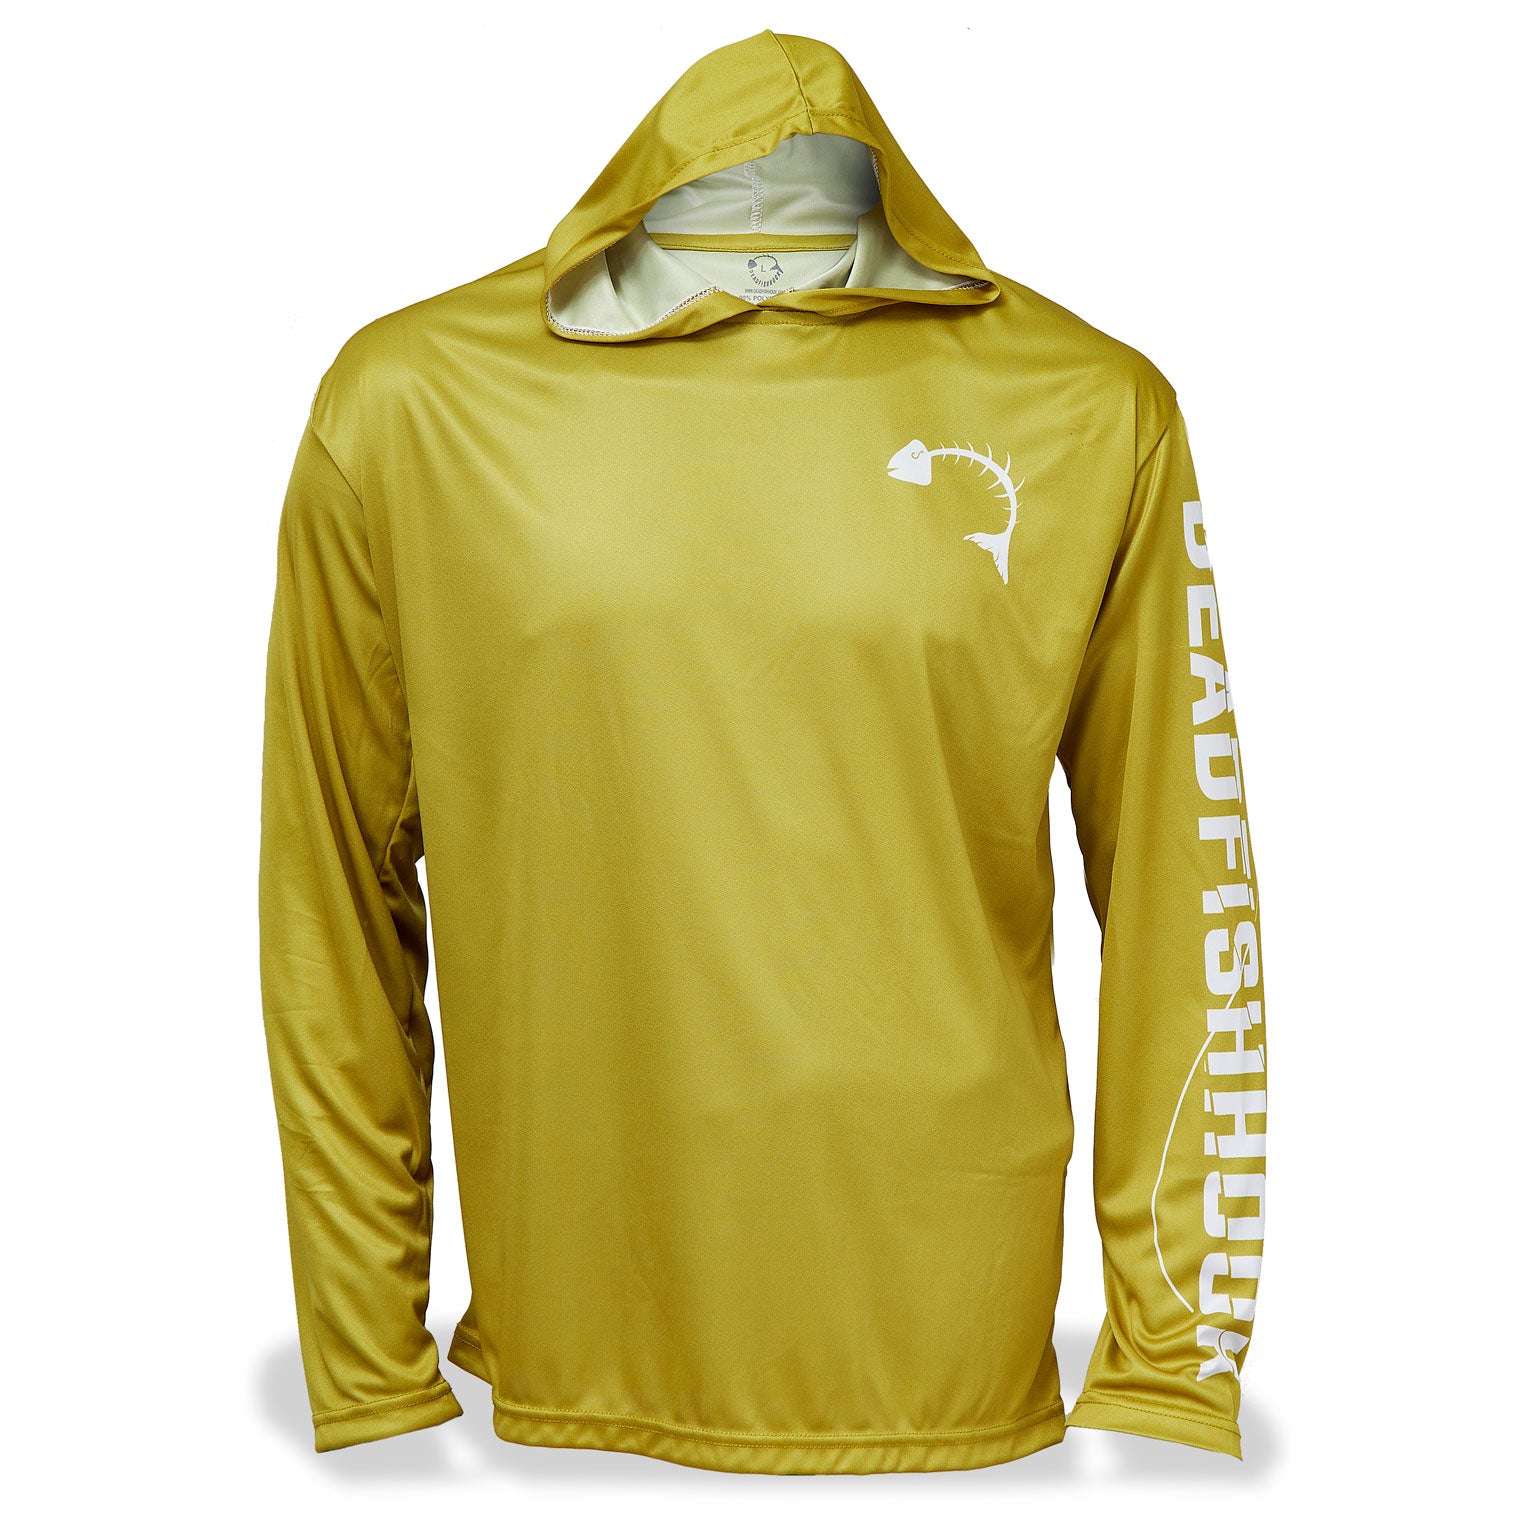 Dead Fish Hook long sleeve hoodie performance fishing shirt for men in mustard yellow with fish bone logo - front view